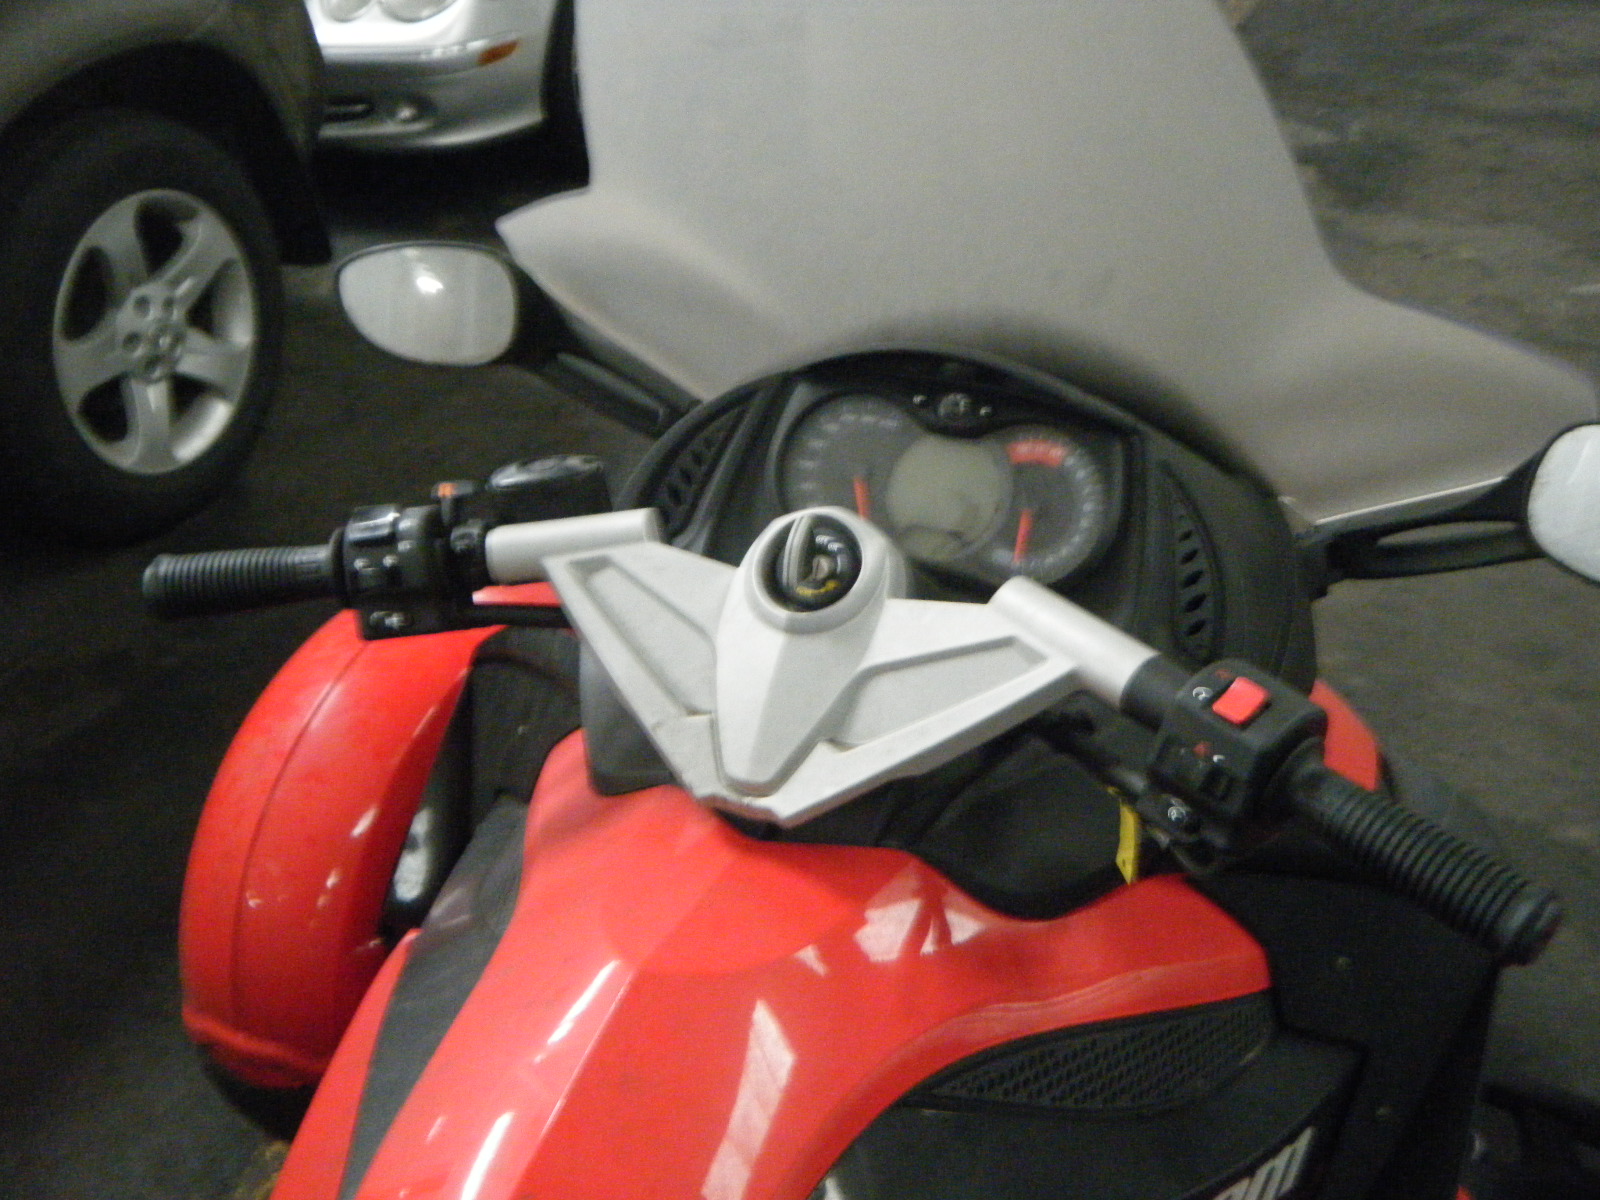 2009 Can-Am Spyder Motorcycle for sale in Brooklyn, NY